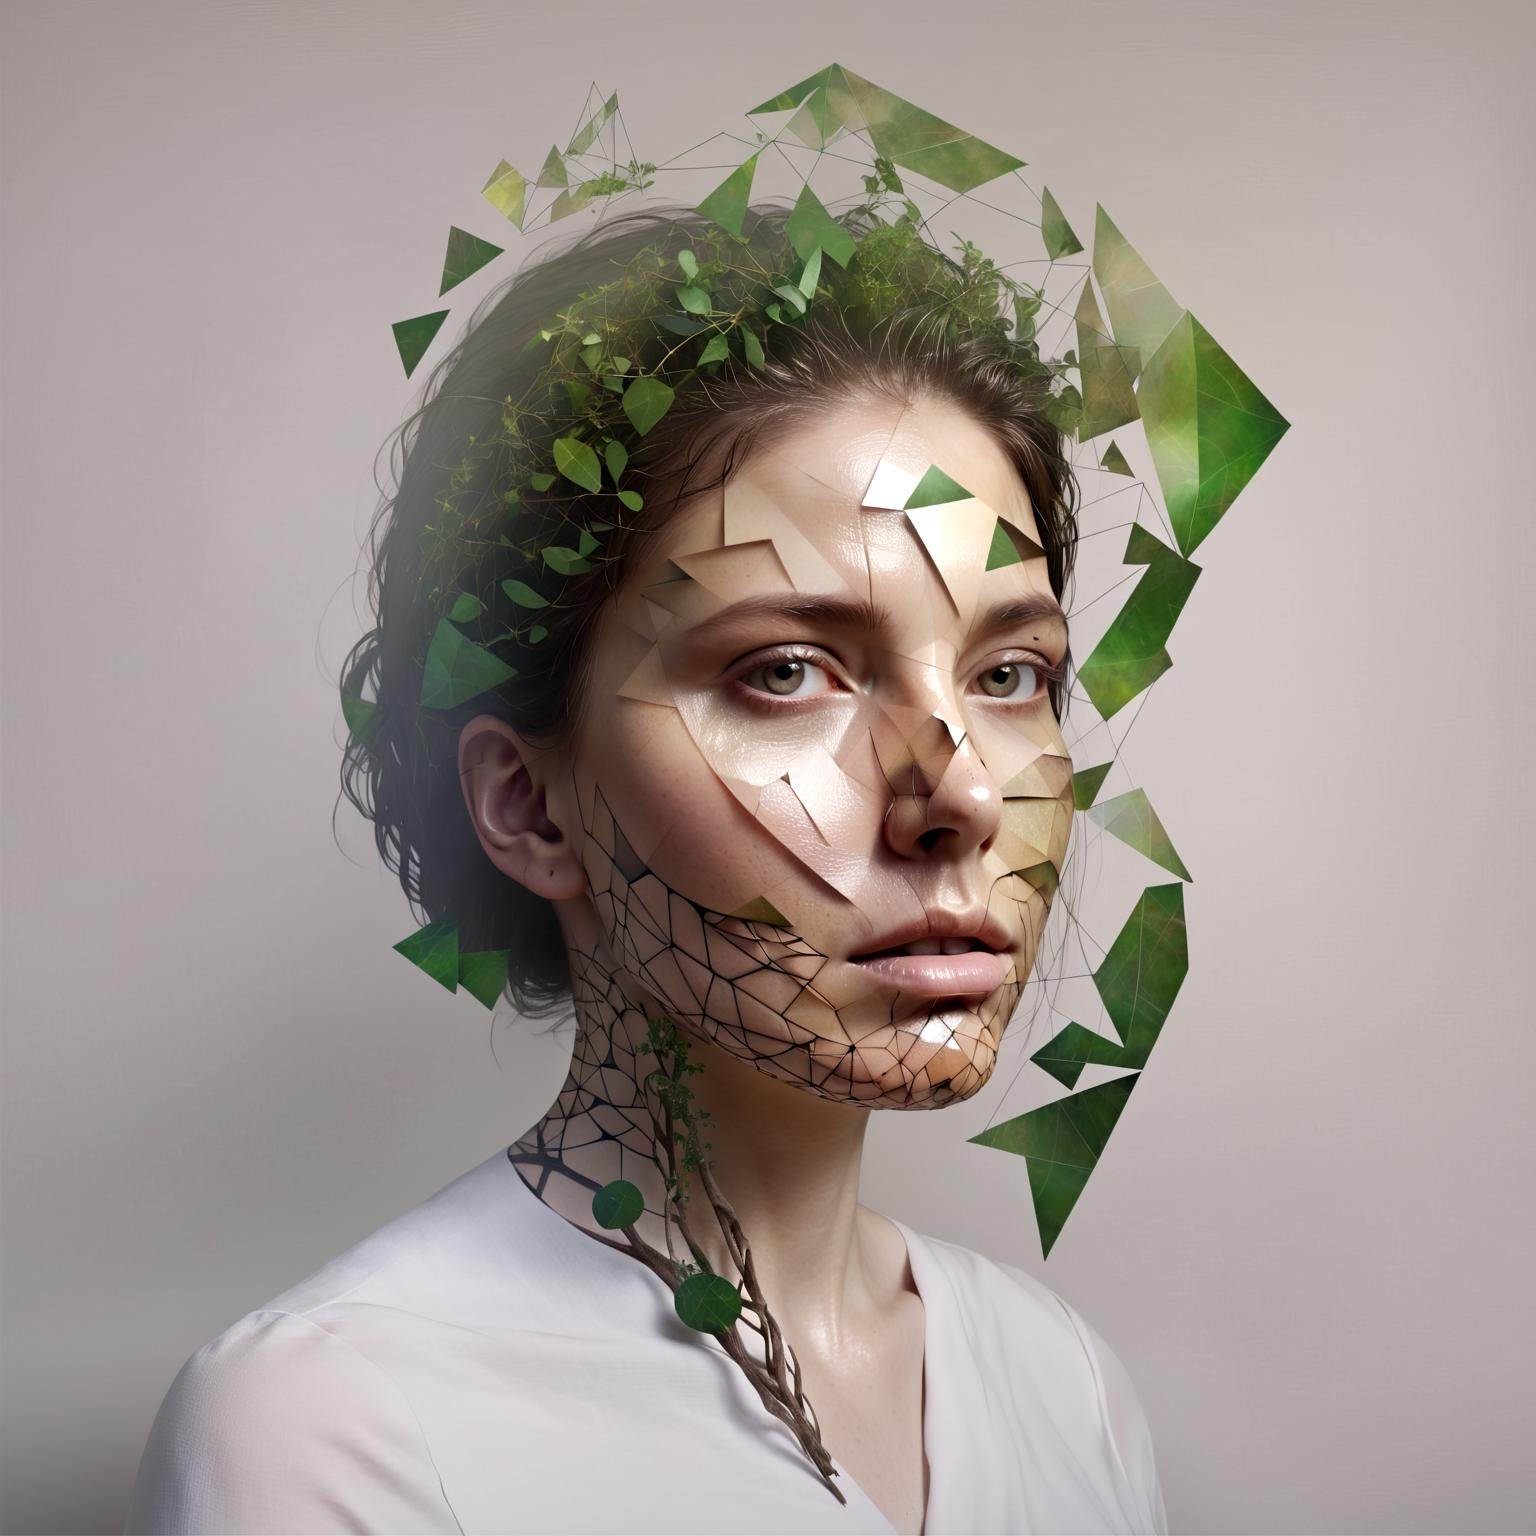 A portrait where the face is shattered into various geometric shapes and reassembles. People with body parts made of intertwined vines, as if merging with nature. Bodies that are transparent, revealing inner mechanisms or galaxies pulsating beneath the skin.,in jorg karg style,,